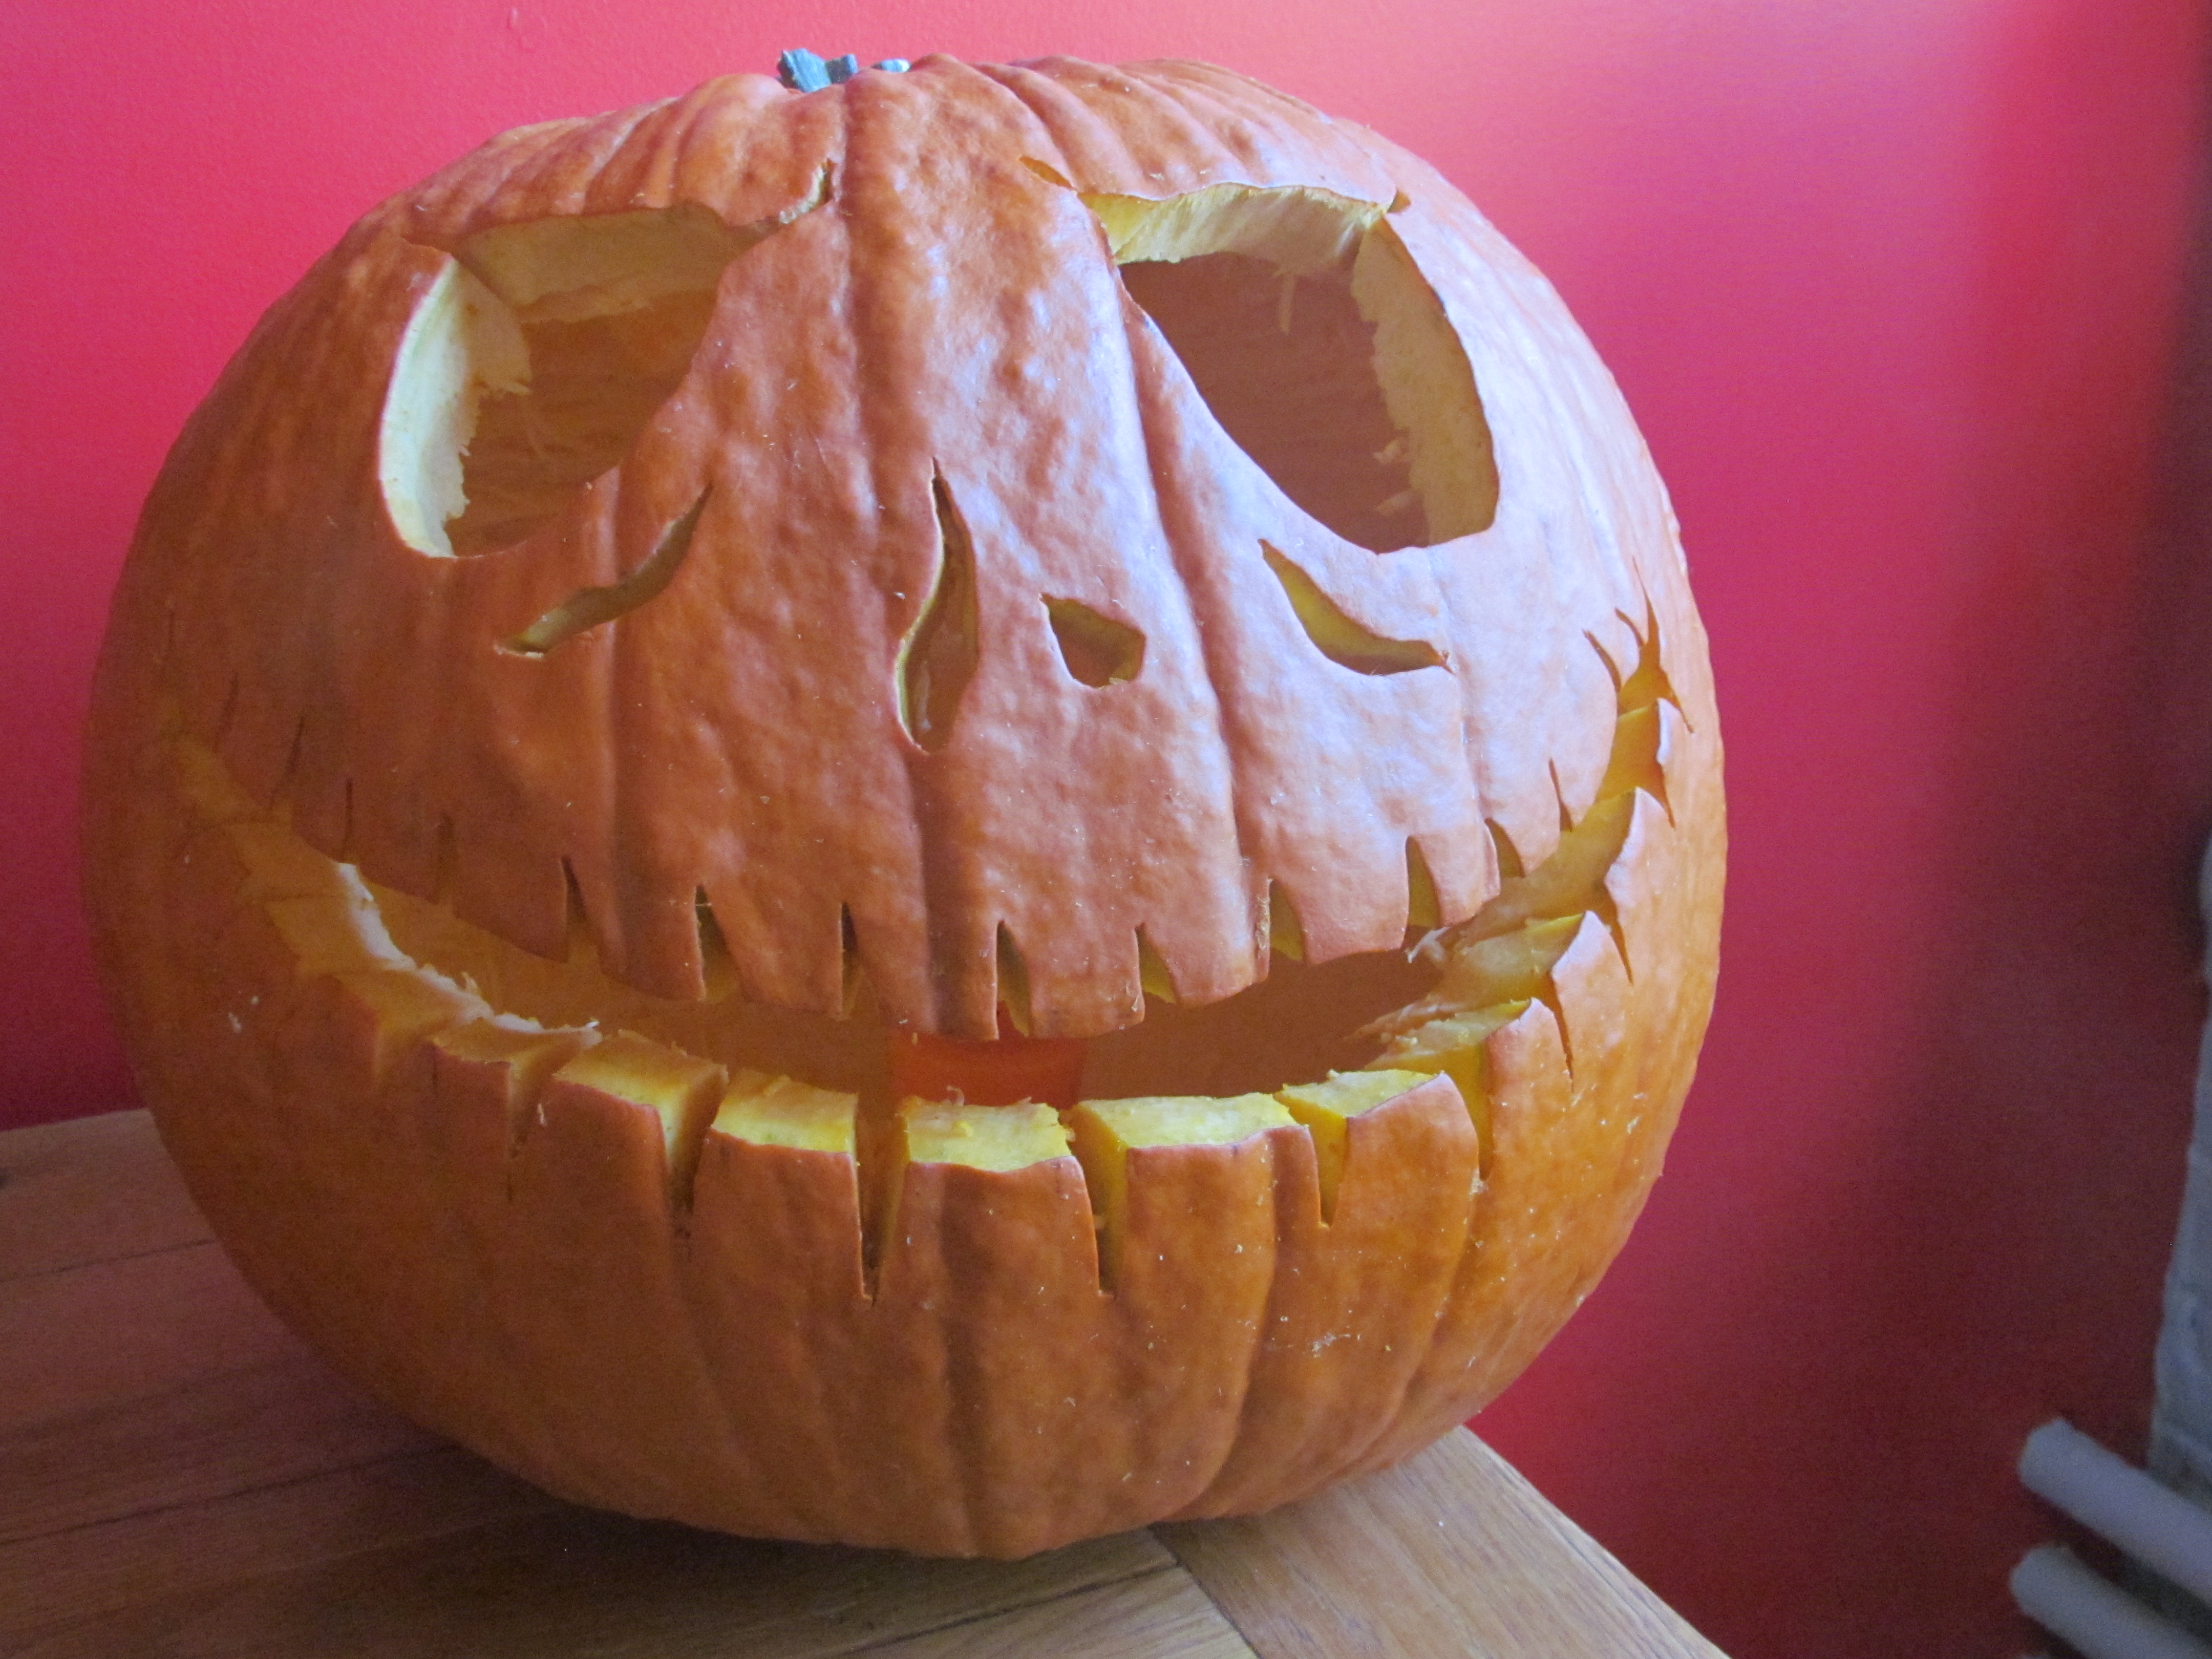 I'm a purist and went for the more traditional pumpkin.